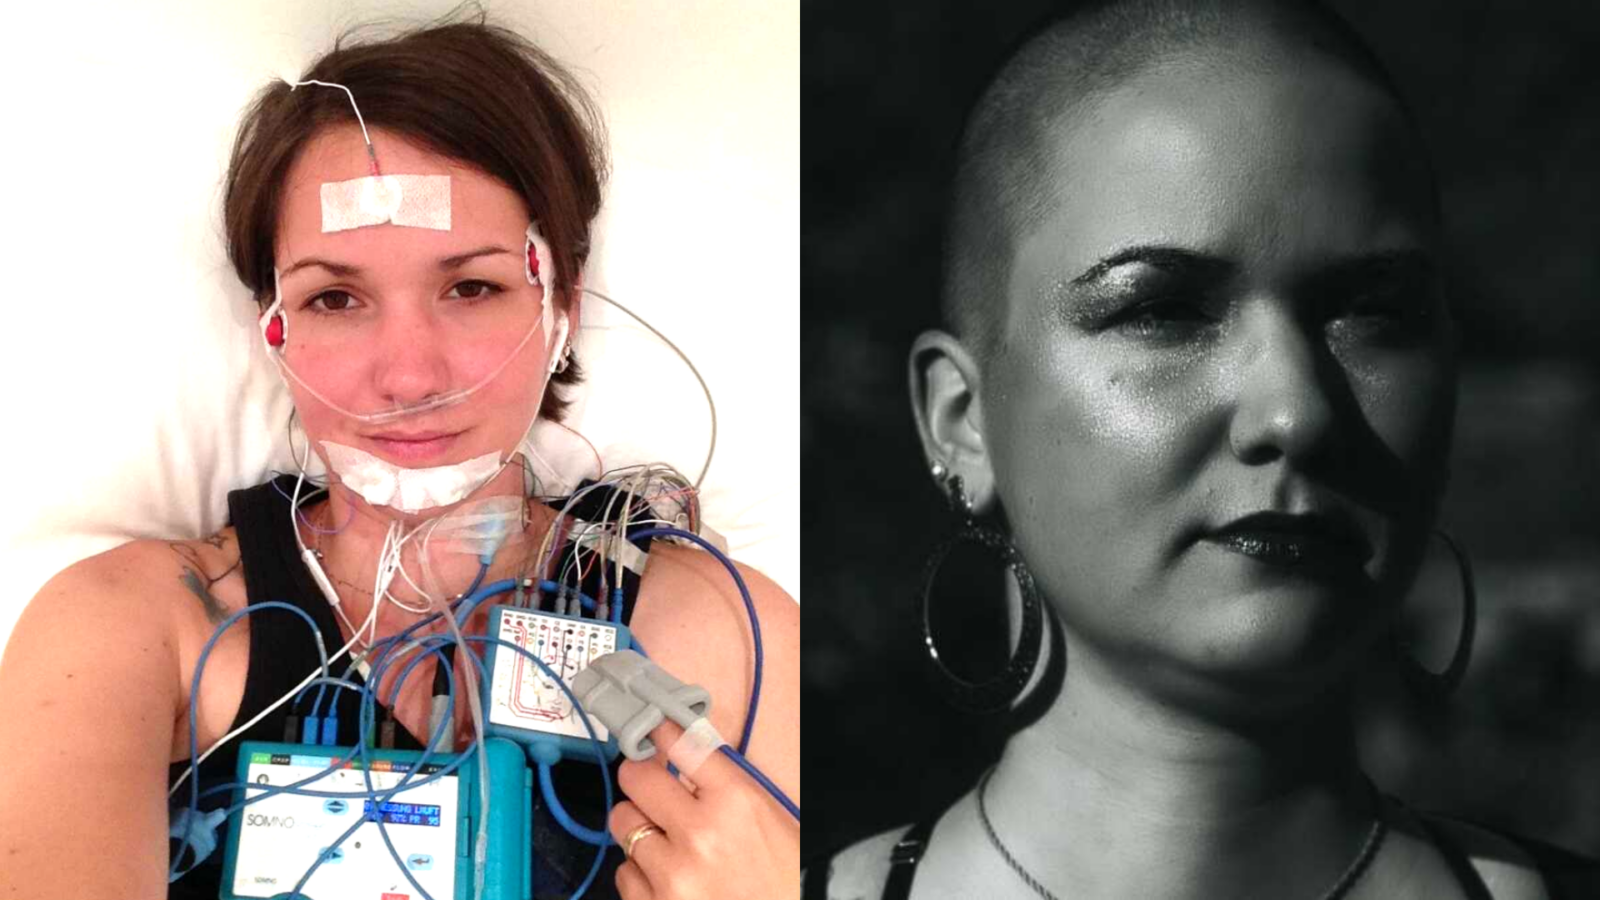 Two photos next to each other both showing the same person. Left: A woman with short brown hair lying in a bed with lots of cables on her head and chest. Right: A black and white
photo of woman with a shaved head wearing huge silver earrings and glittery make-up.